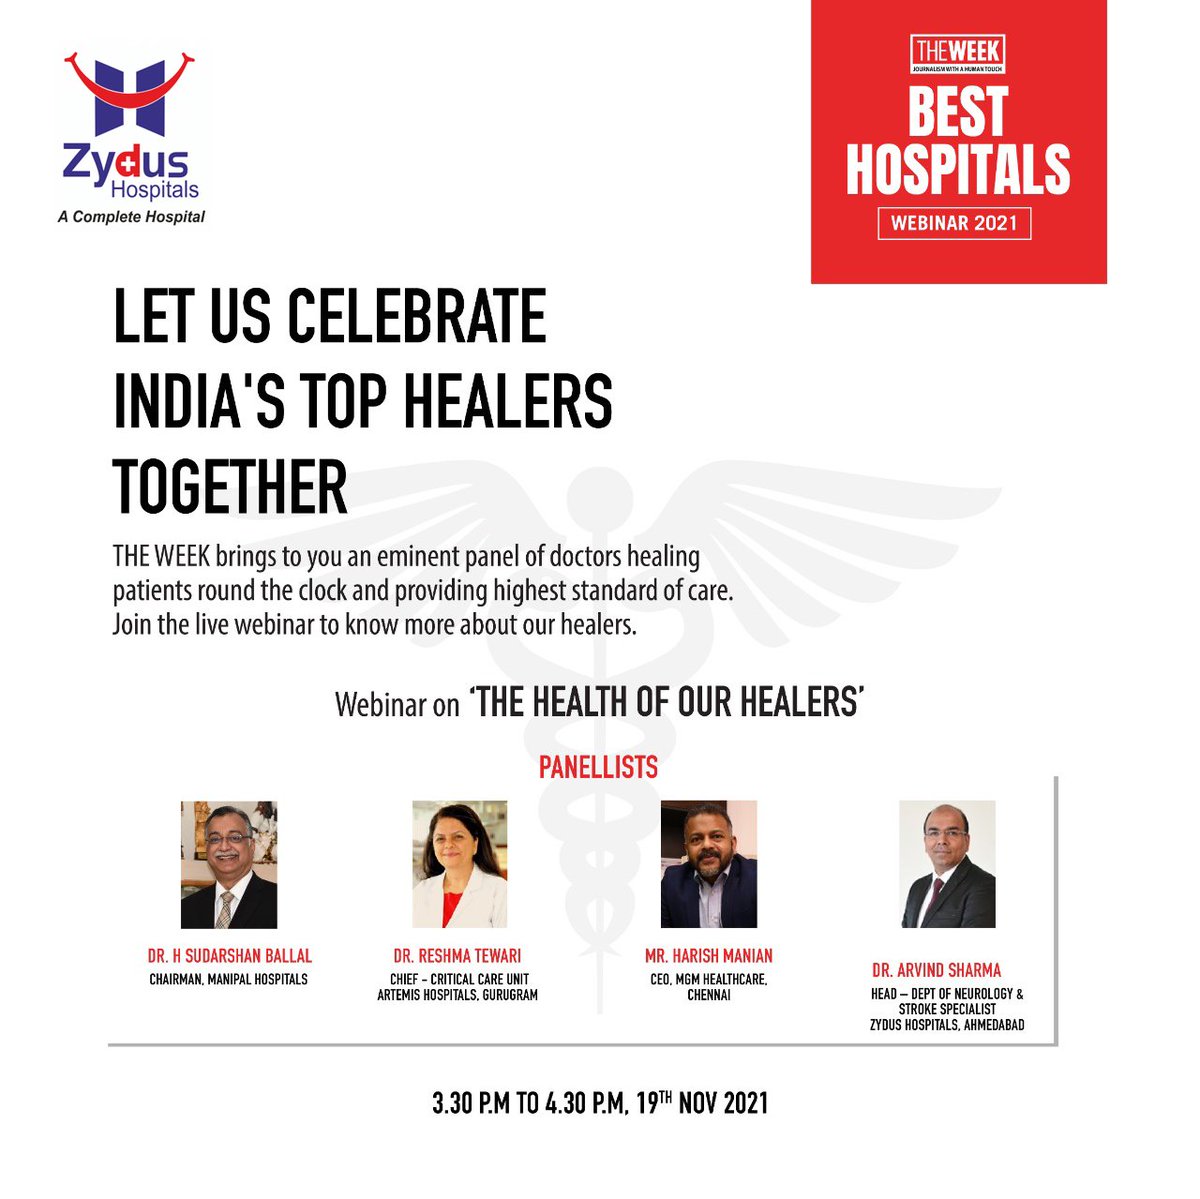 The Week brings to us a webinar on The Health of Our Healers with eminent panel of doctors who have been offering relentless service round the clock. 
Join the webinar. Register here: https://t.co/RMgUVhKrLf
#Doctors #TheWeek #ZydusHospital #BestHospitalinAhmedabad #Ahmedabad https://t.co/NNWpZvbCt1